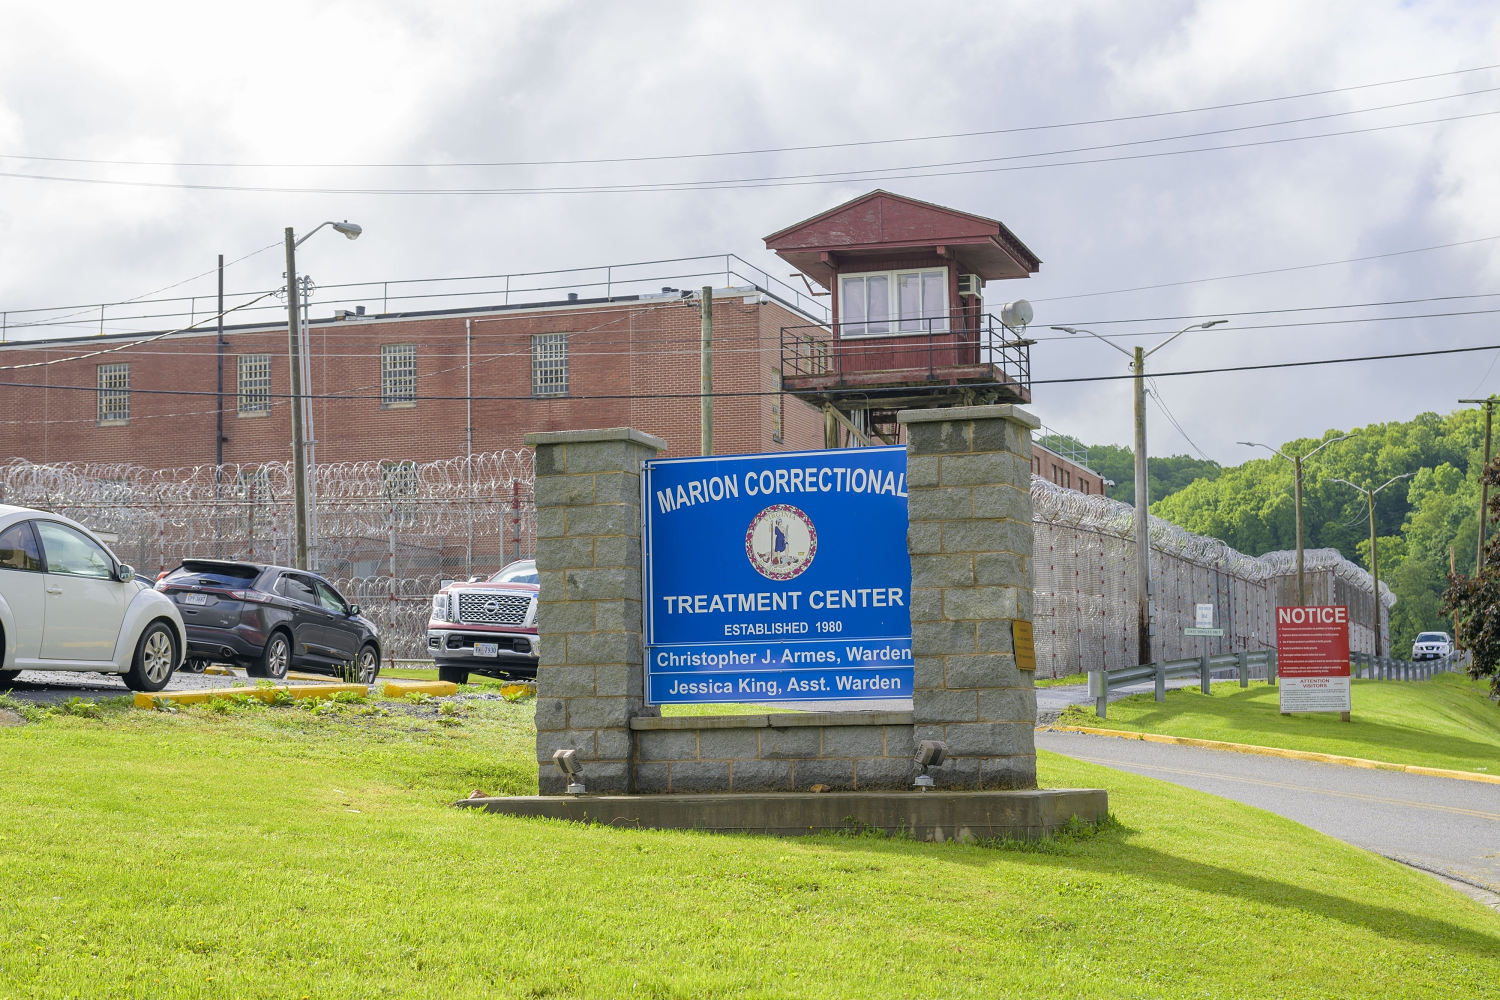 ‘How do you get hypothermia in a prison?’ Records show hospitalizations among Virginia inmates